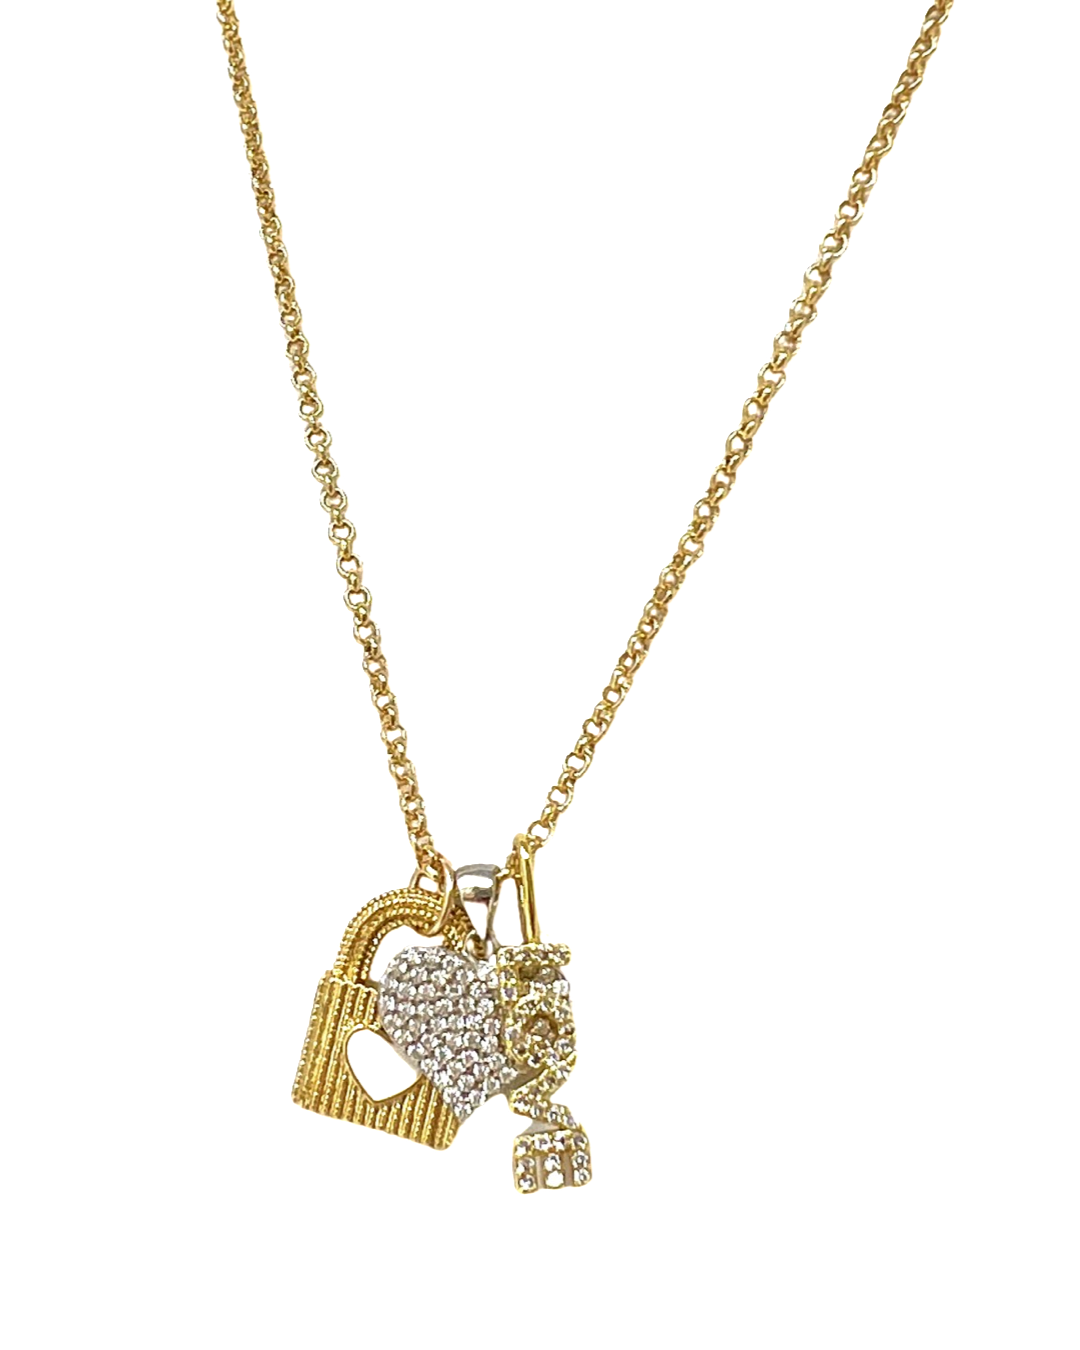 Basket of Love Charm Necklace in Gold